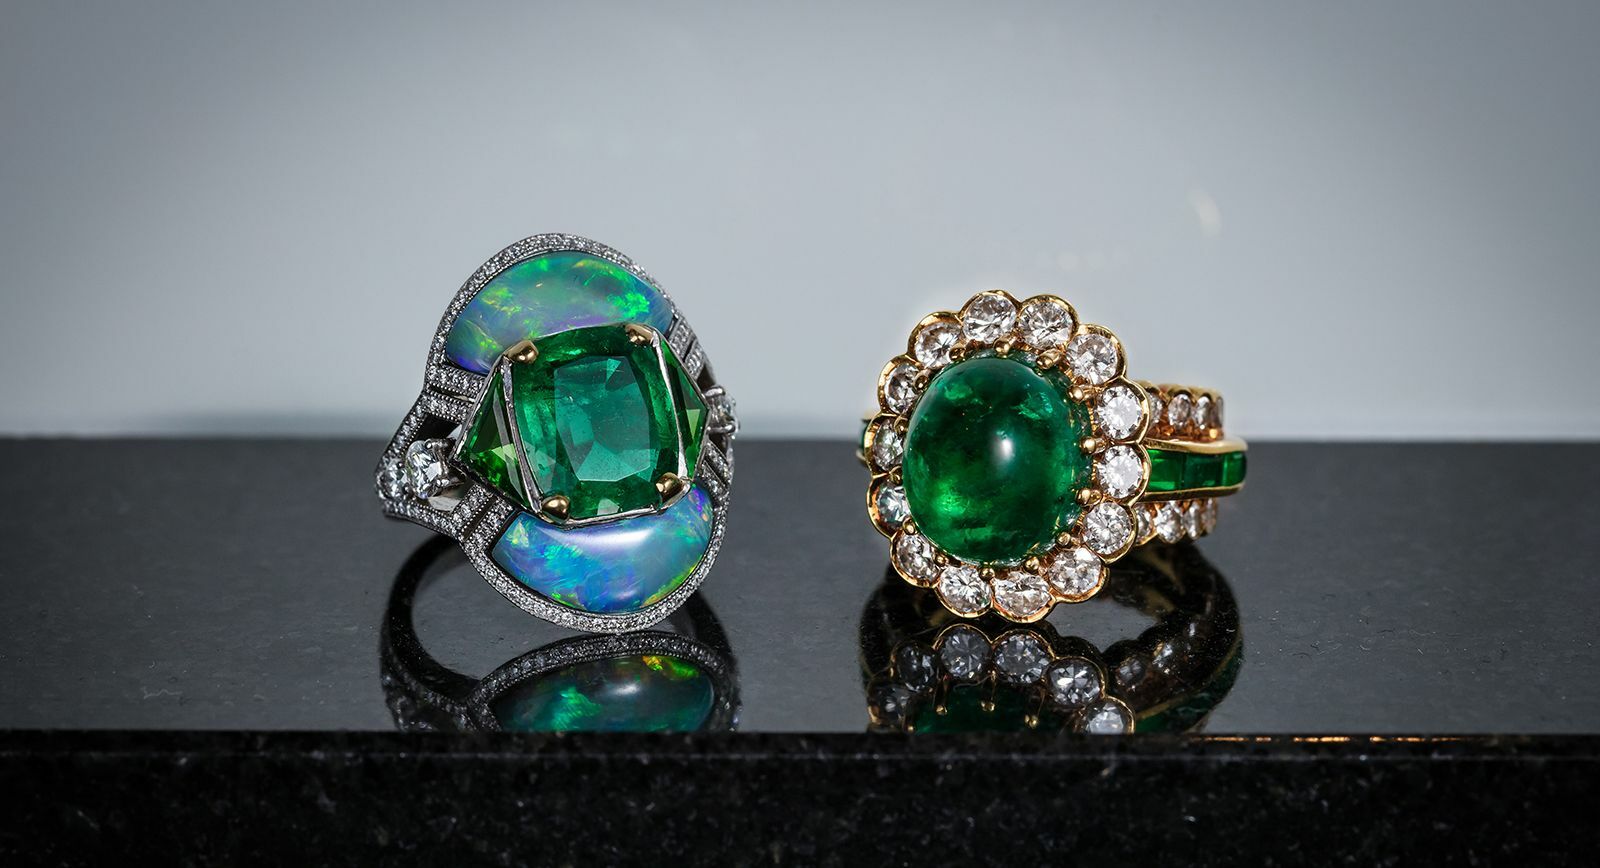 Bonhams' London Jewels auction in September 2021 contains this emerald, opal and tourmaline dress ring (left) and an emerald and diamond ring (right)